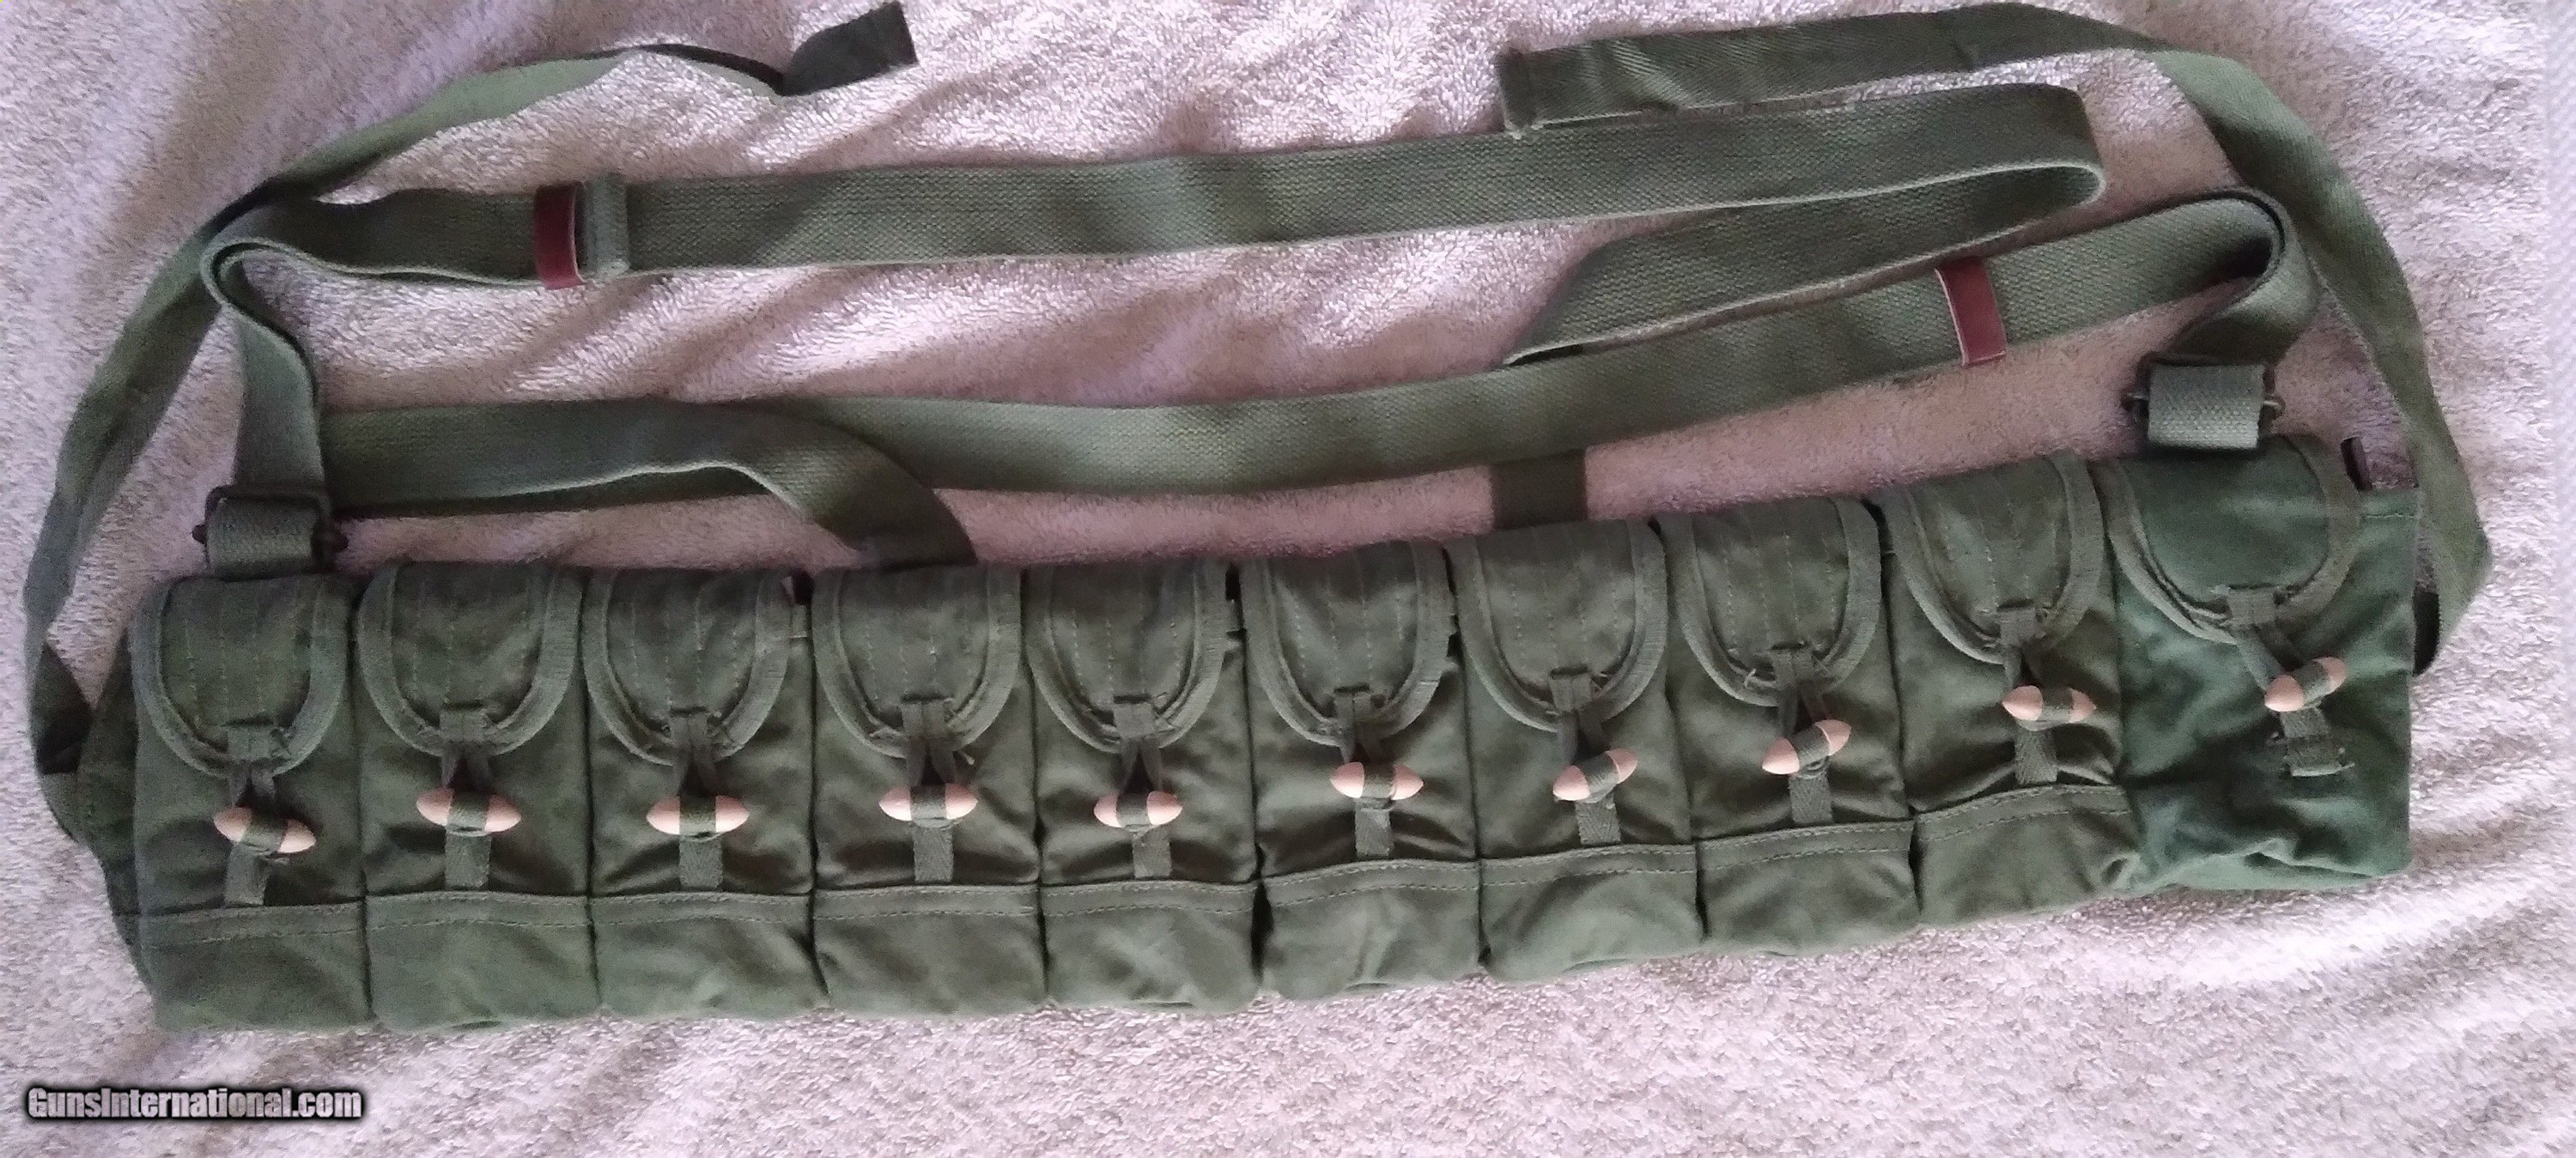 CHINESE SKS CHEST BANDOLIER TYPE 56 7.62x39mm